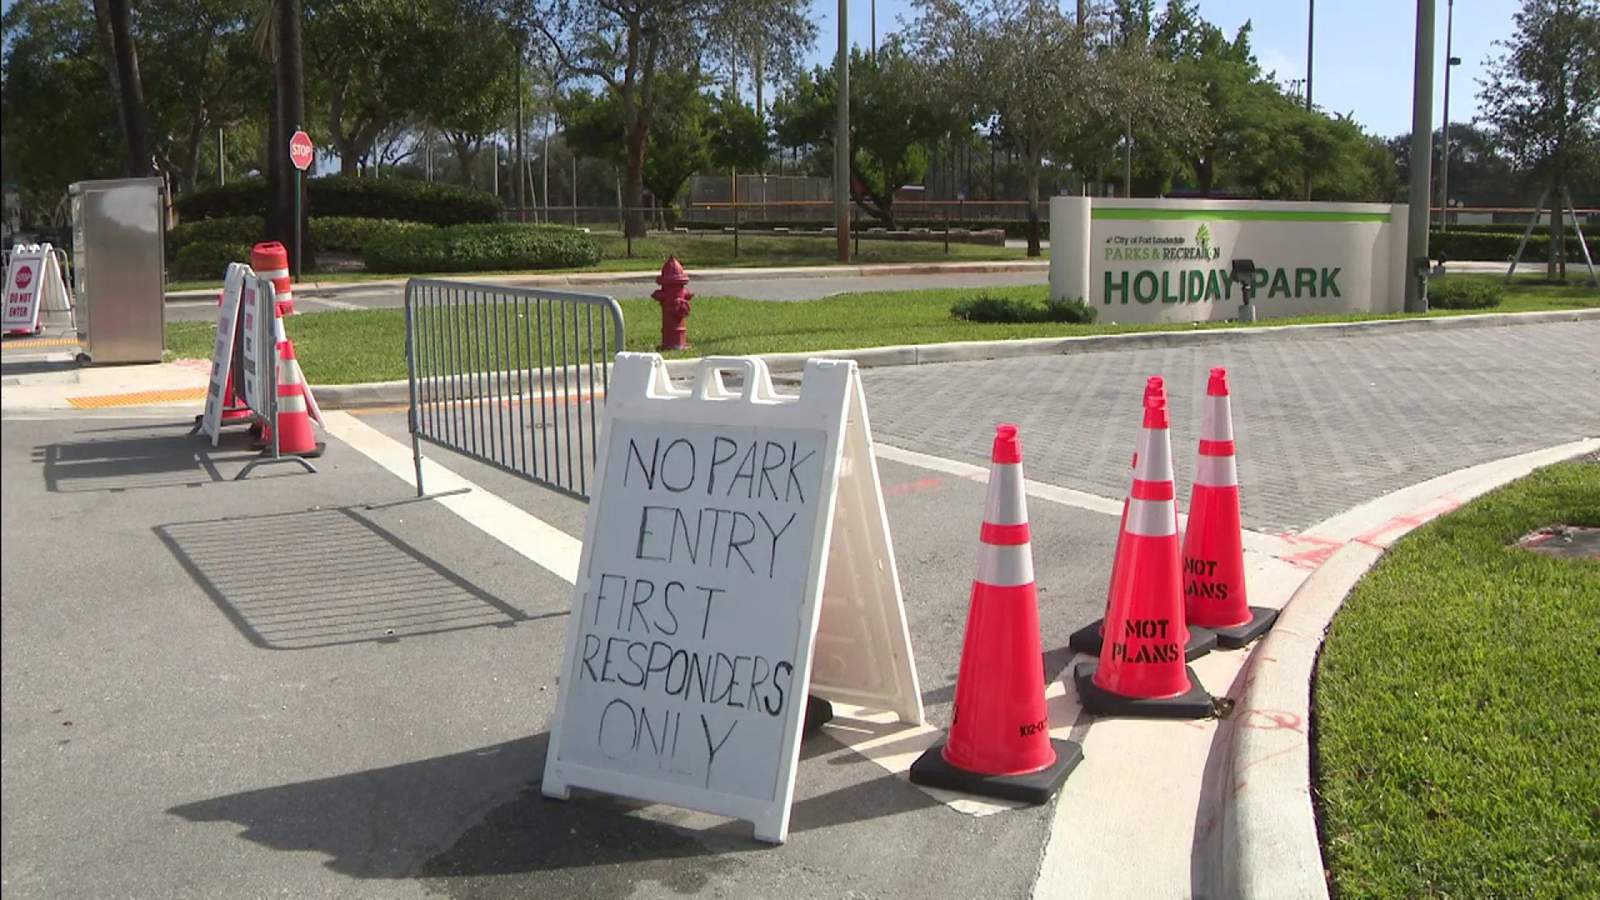 Holiday Park in Fort Lauderdale closes COVID-19 testing site, will reopen soon to administer vaccine